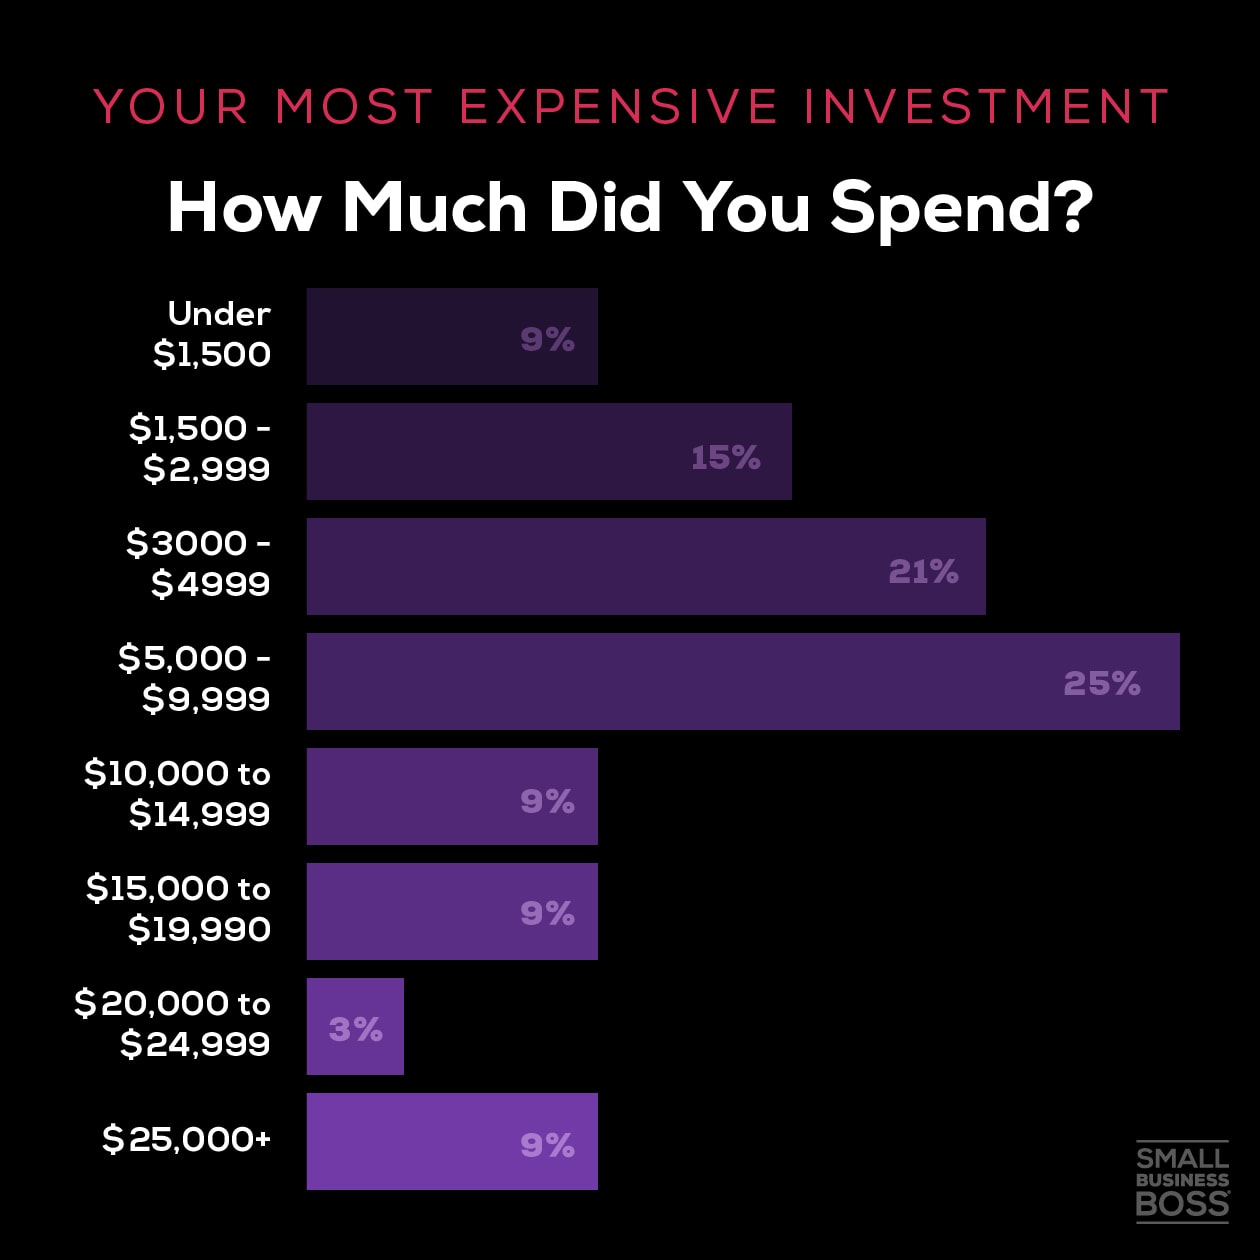 Most expensive investment